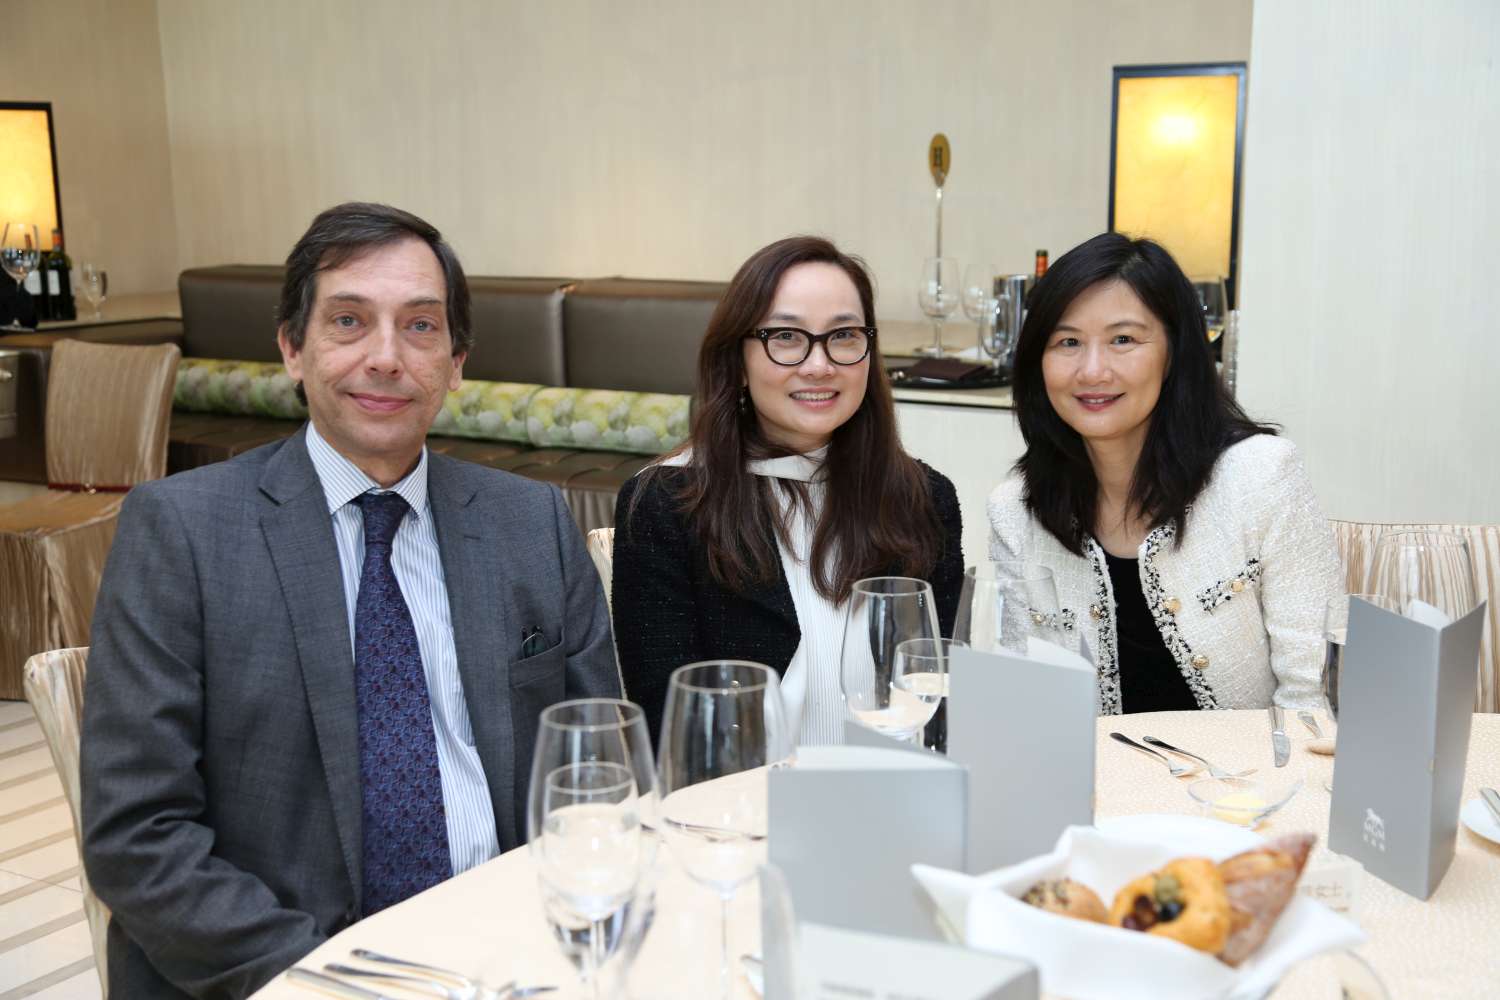 CESL Asia further commits itself to the Platform by setting the path for the acquisition of Monte do Pasto and signing a Strategic Development Agreement with Bank of China, Macau Brunch